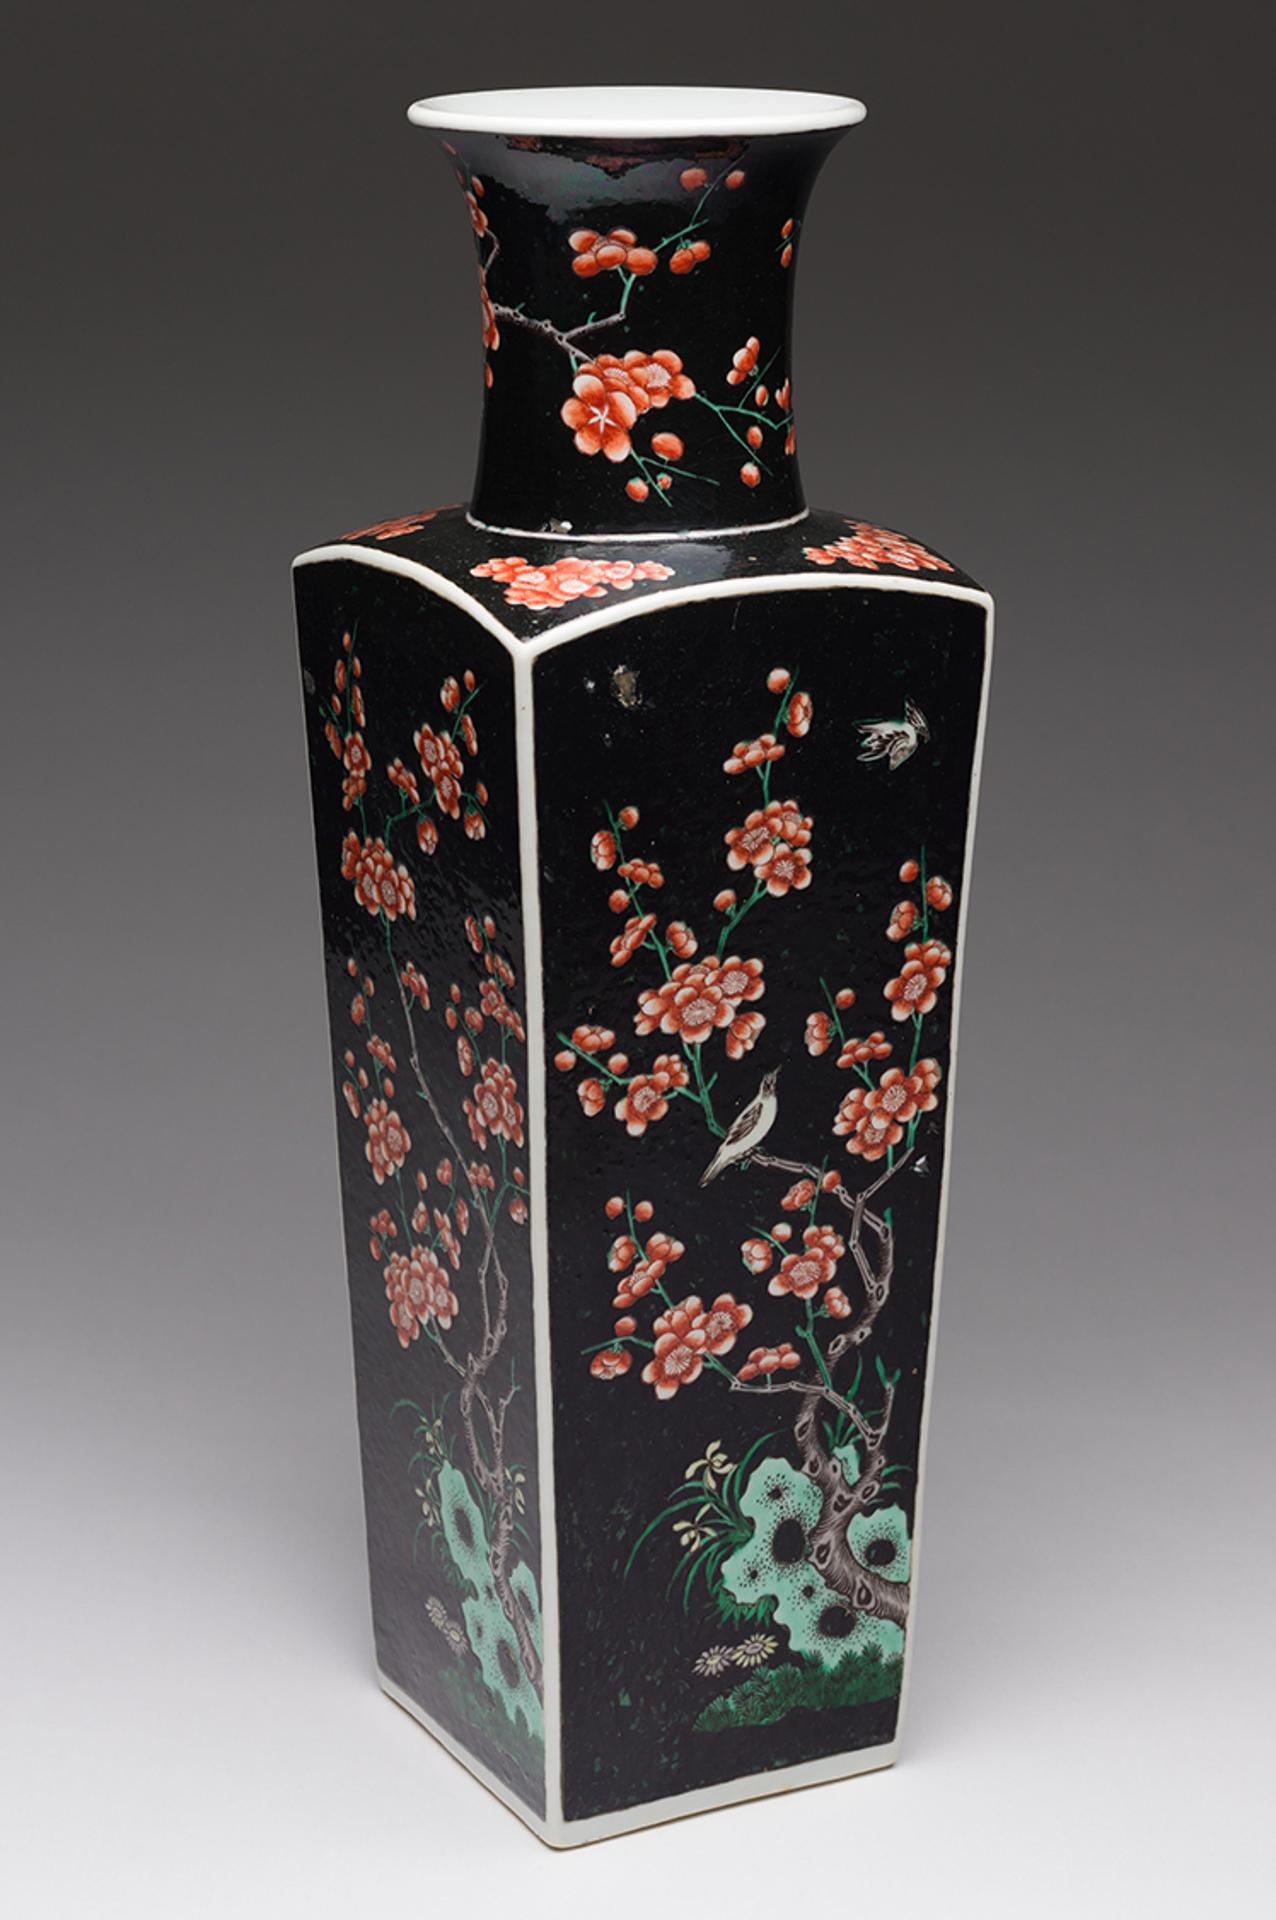 Chinese Art - A Large Chinese Famille Noire Faceted 'Fauna and Prunus' Vase, 19th Century